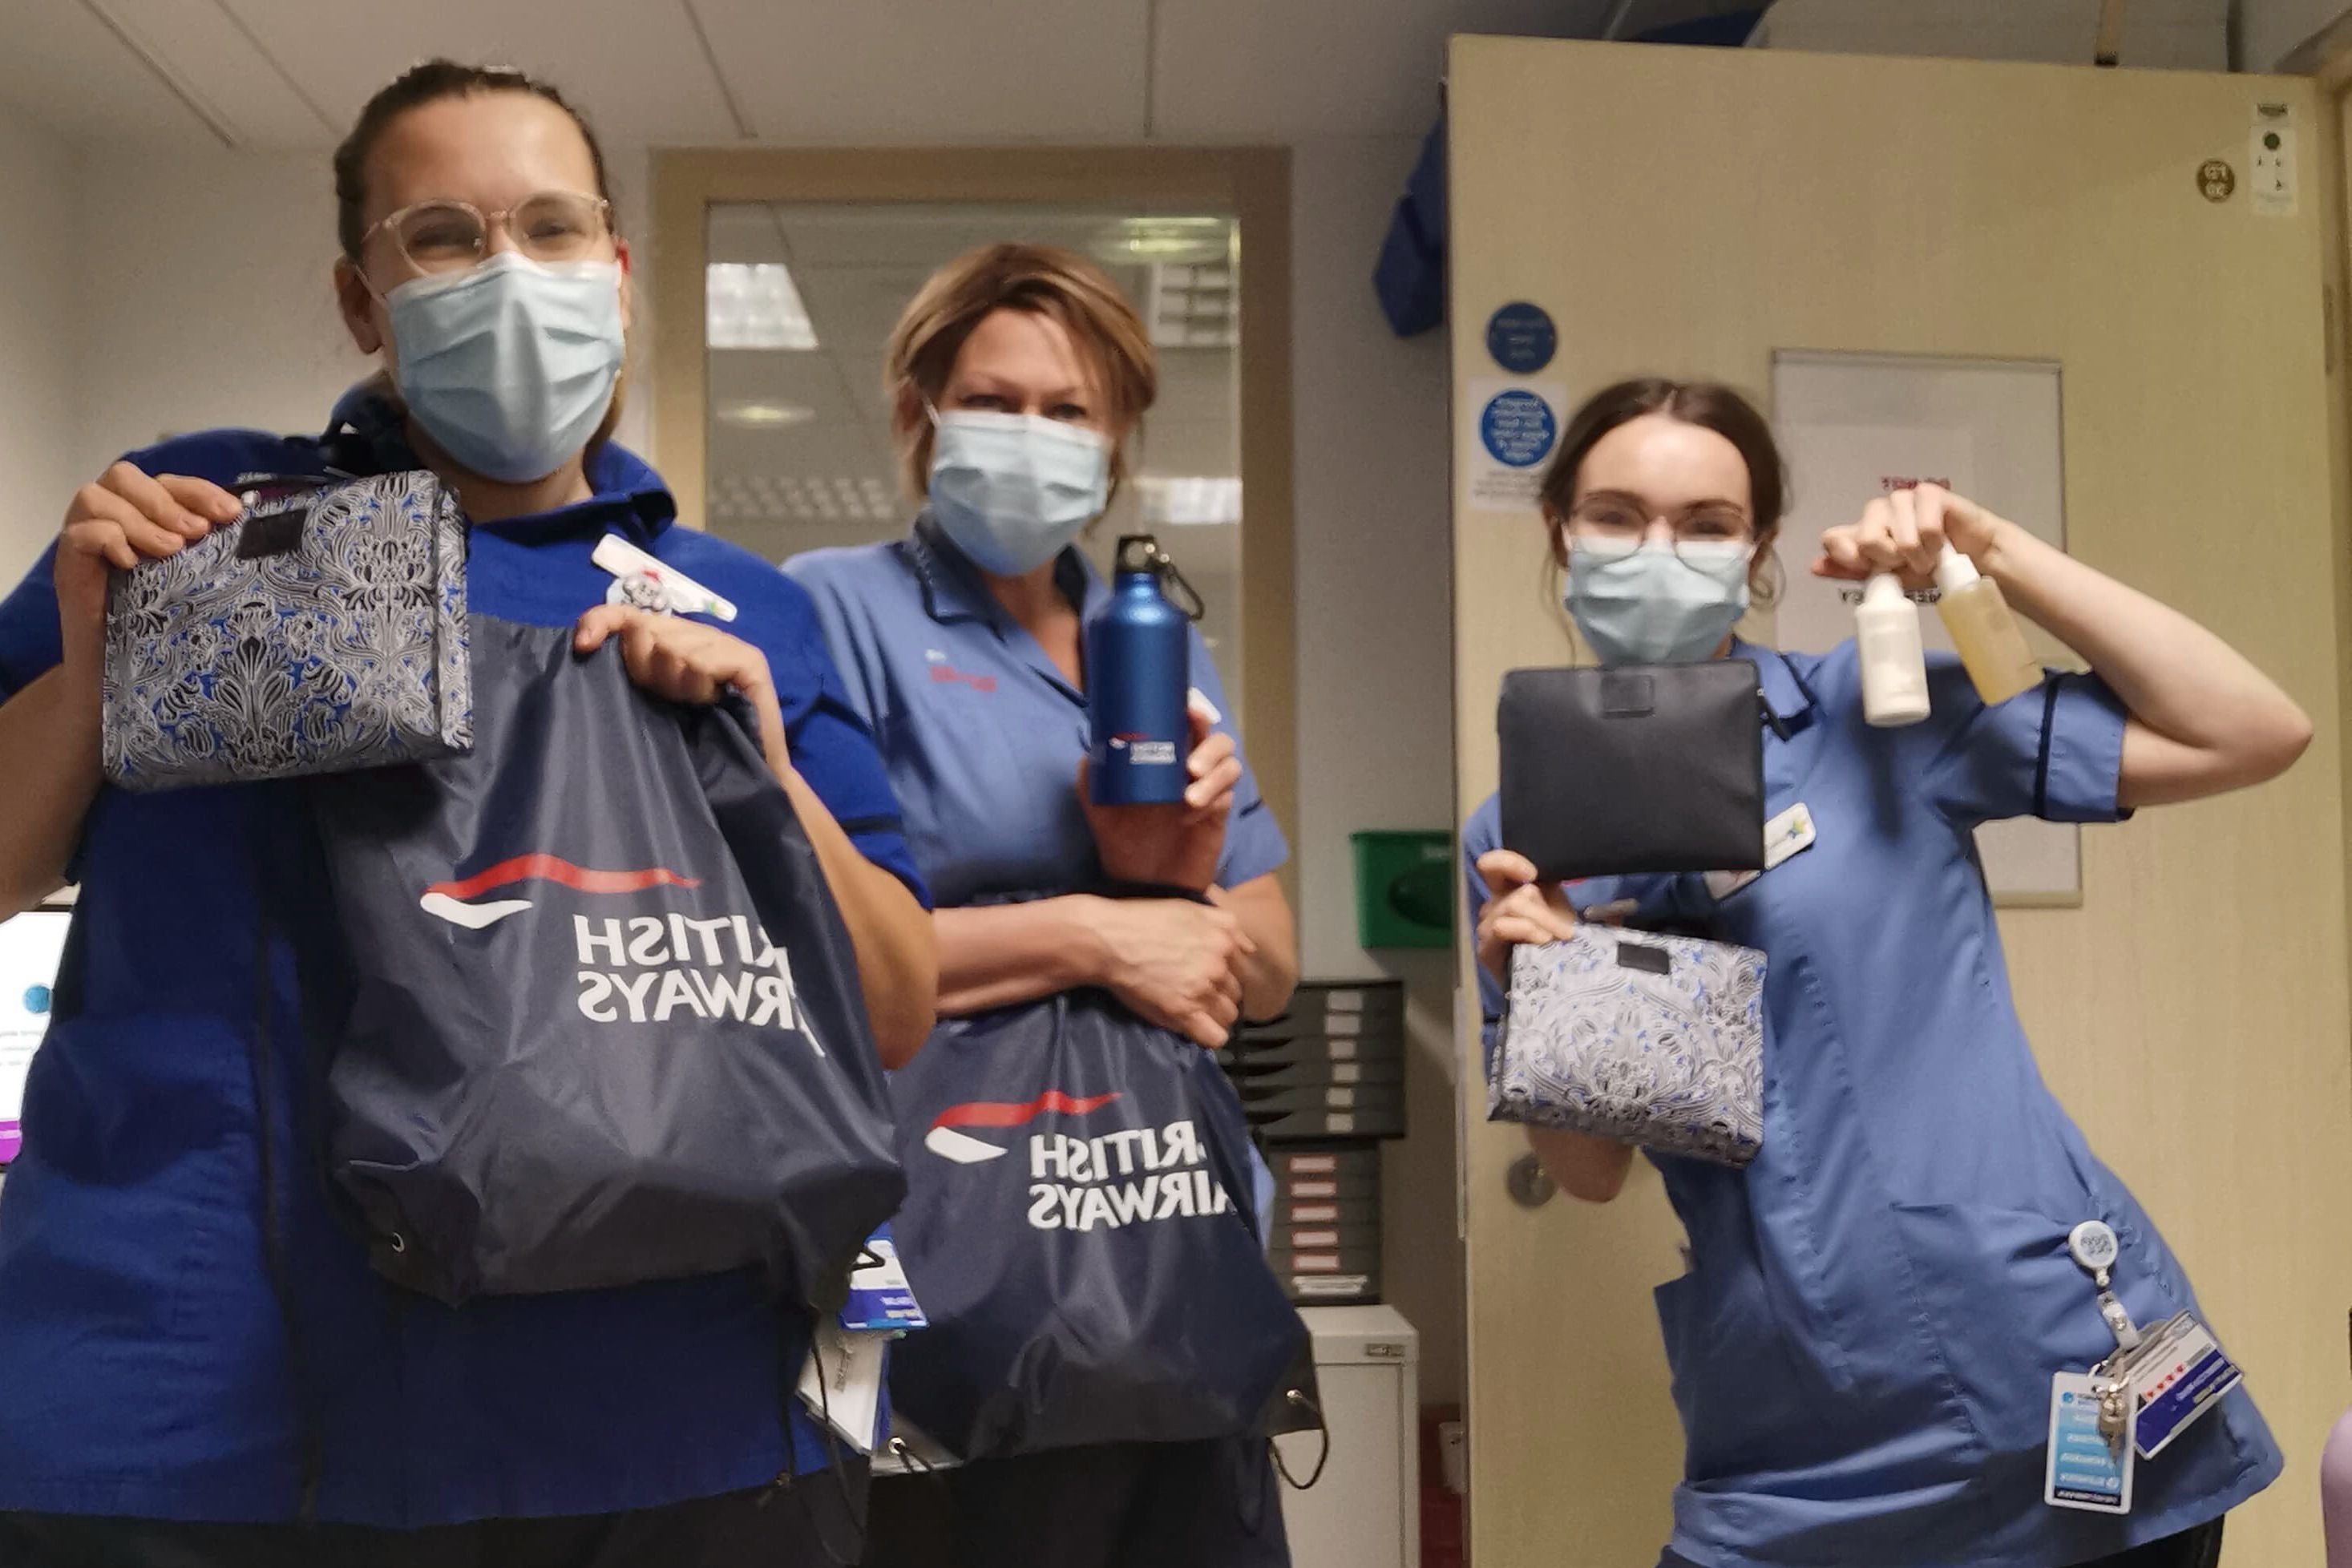 British Airways has donated more than 200,000 items including washbags, socks, snacks and blankets to more than 90 community projects, NHS hospitals, care homes and food banks across the UK to support the COVID19 response. Click to enlarge.